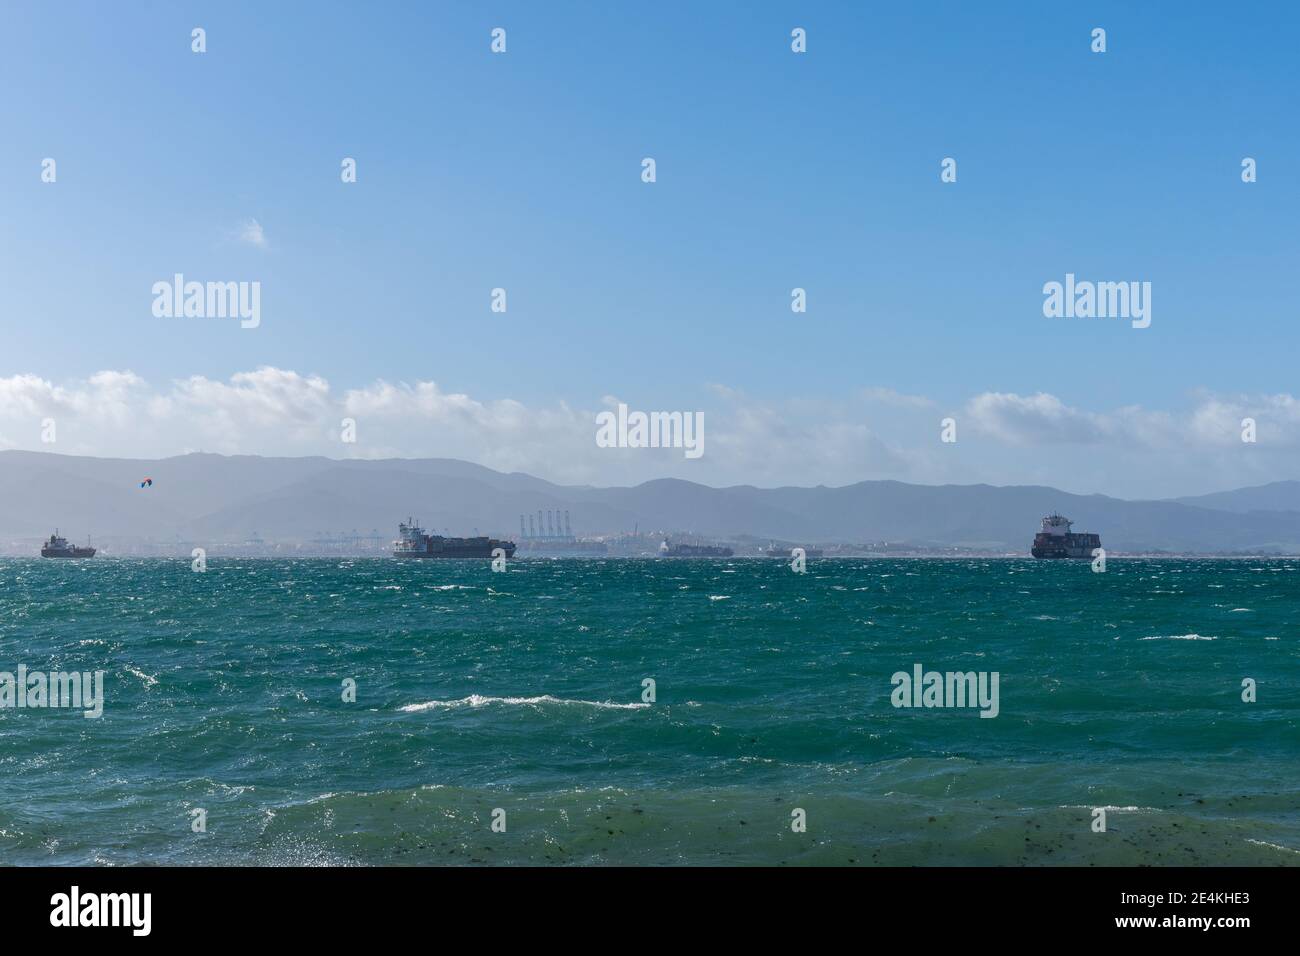 La Linea de la Concepcion, Spain - 22 January 2020: freight ships and container ships in the Bay of Gibraltar waiting to unload cargo Stock Photo